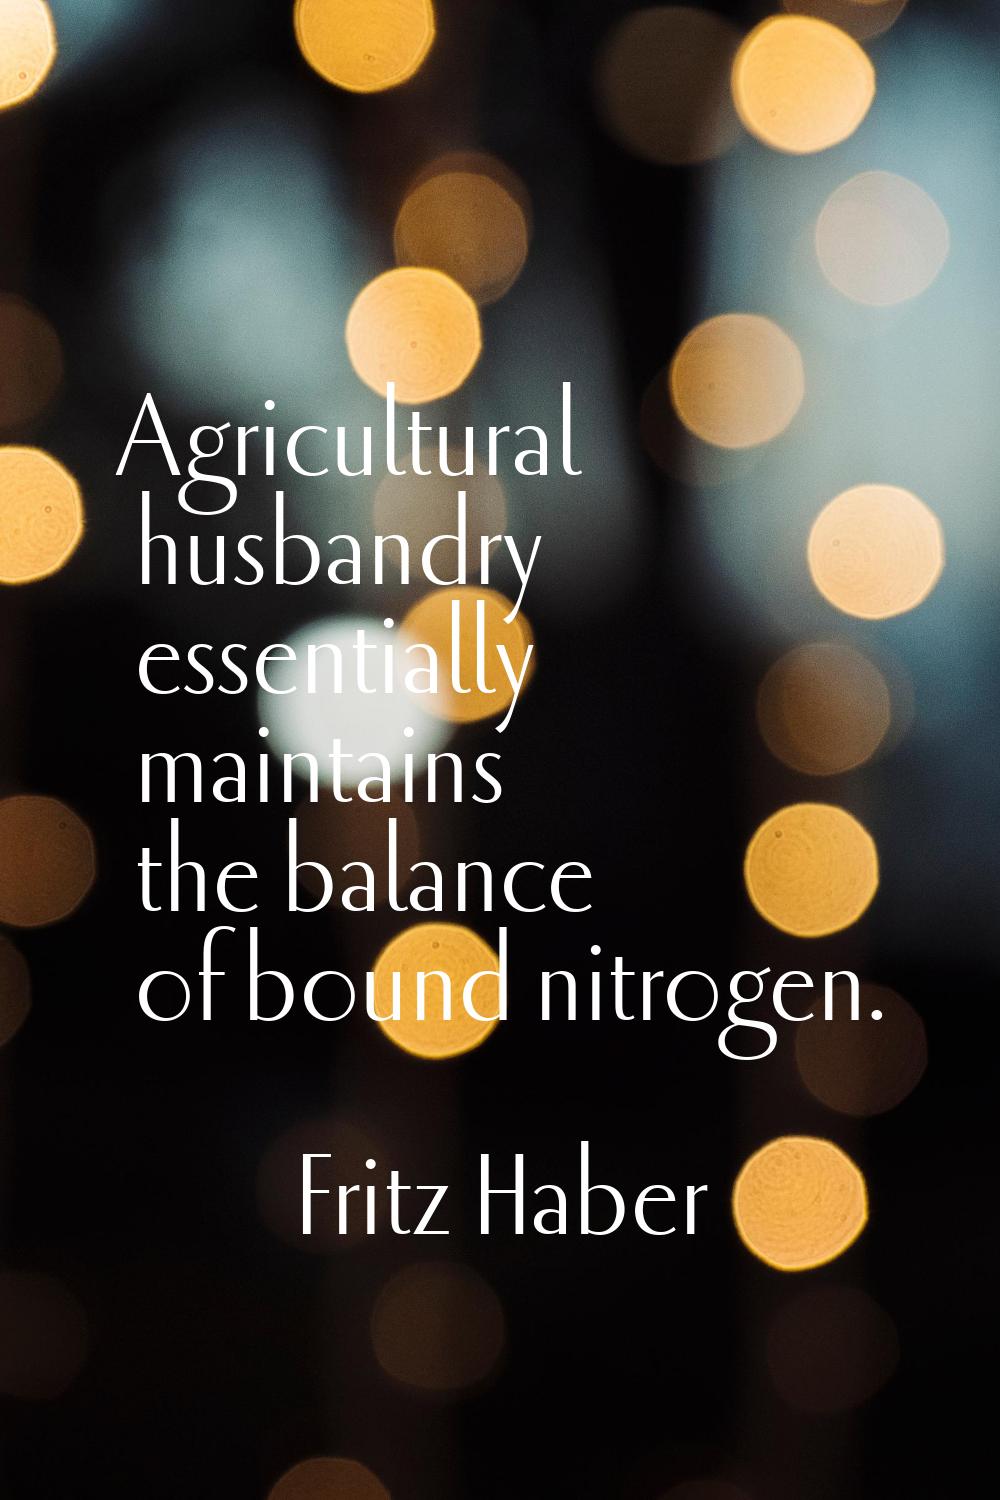 Agricultural husbandry essentially maintains the balance of bound nitrogen.